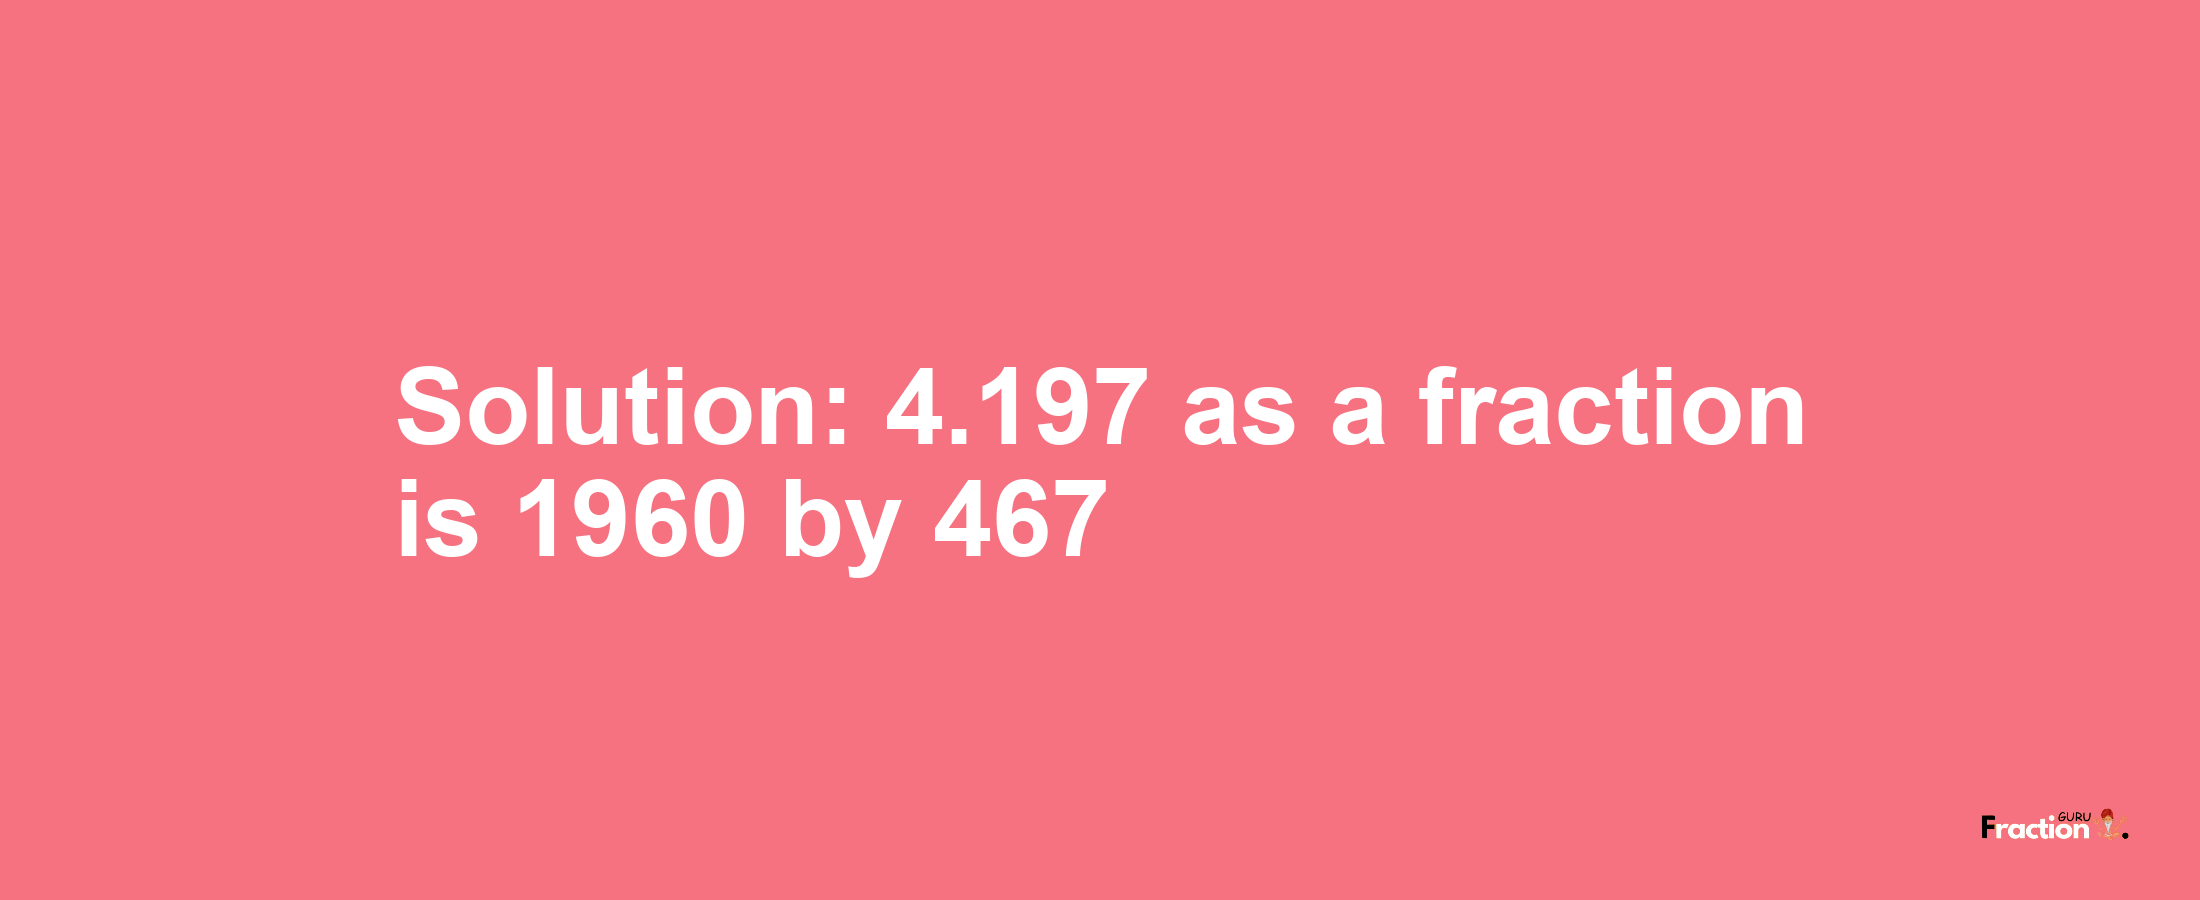 Solution:4.197 as a fraction is 1960/467